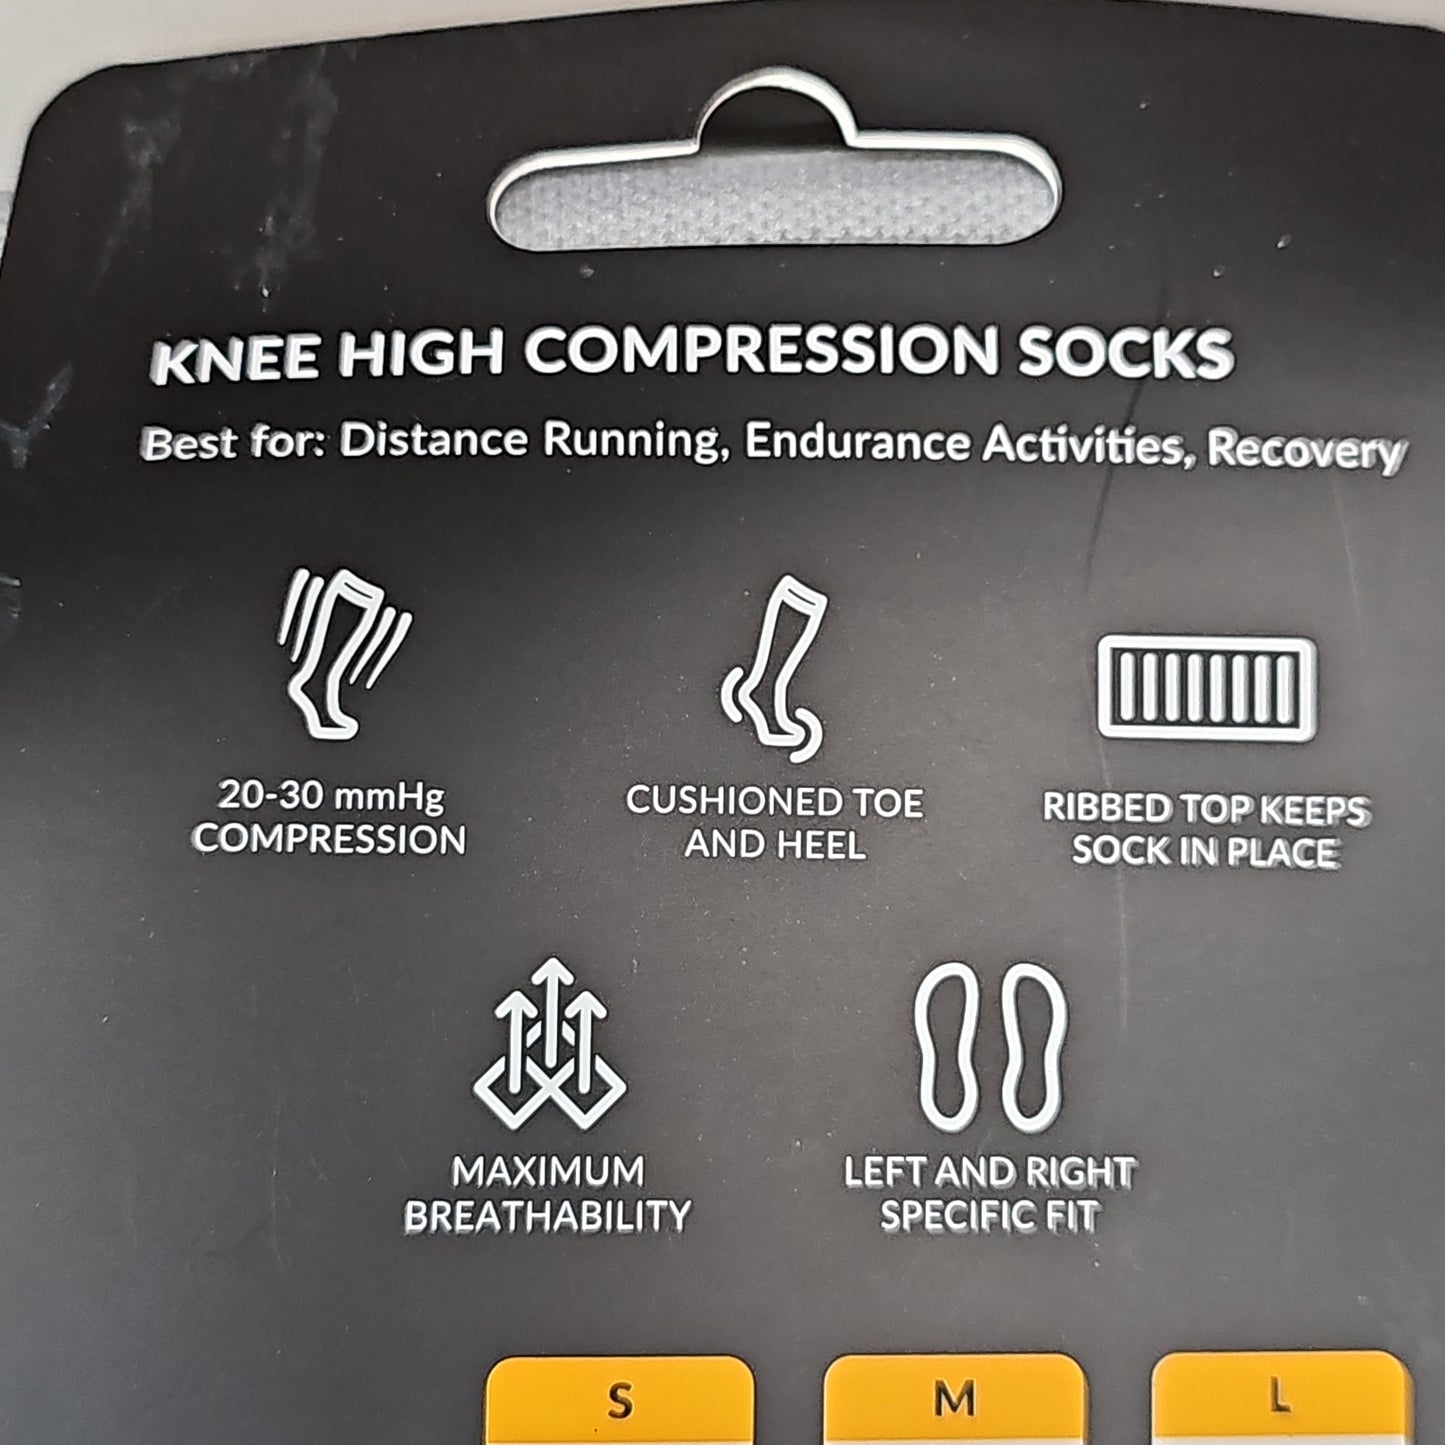 NATHAN Speed Knee High Compression Socks Sz S Monument Grey NS10660-80128-S (New)